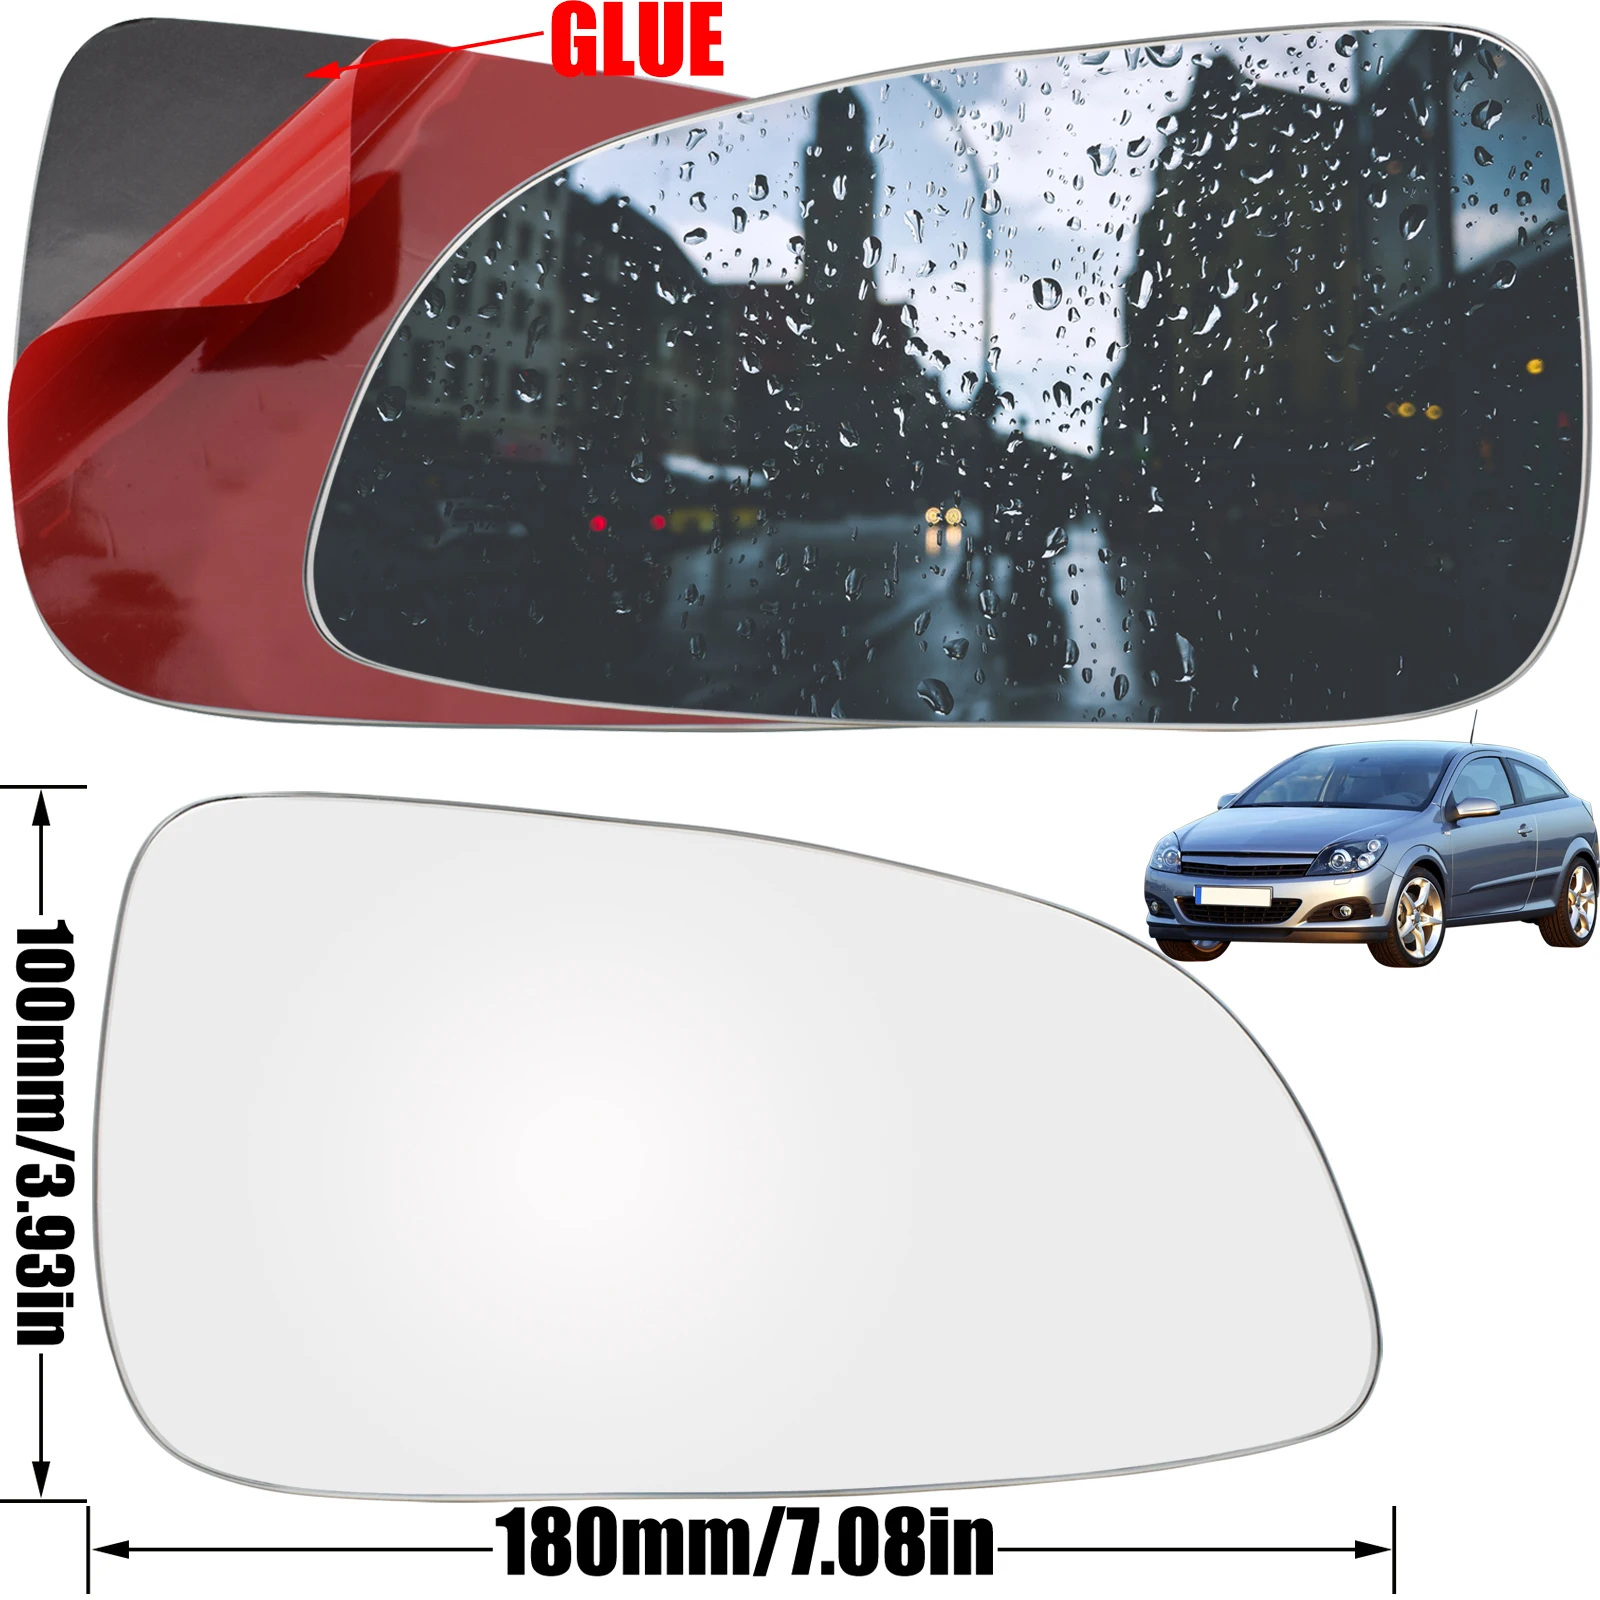 

For Opel / Vauxhall Astra H 2004 - 2009 Holden Astra AH Driver Passenger Door Side Wing Mirror Glass Spherical Stick On Sticky